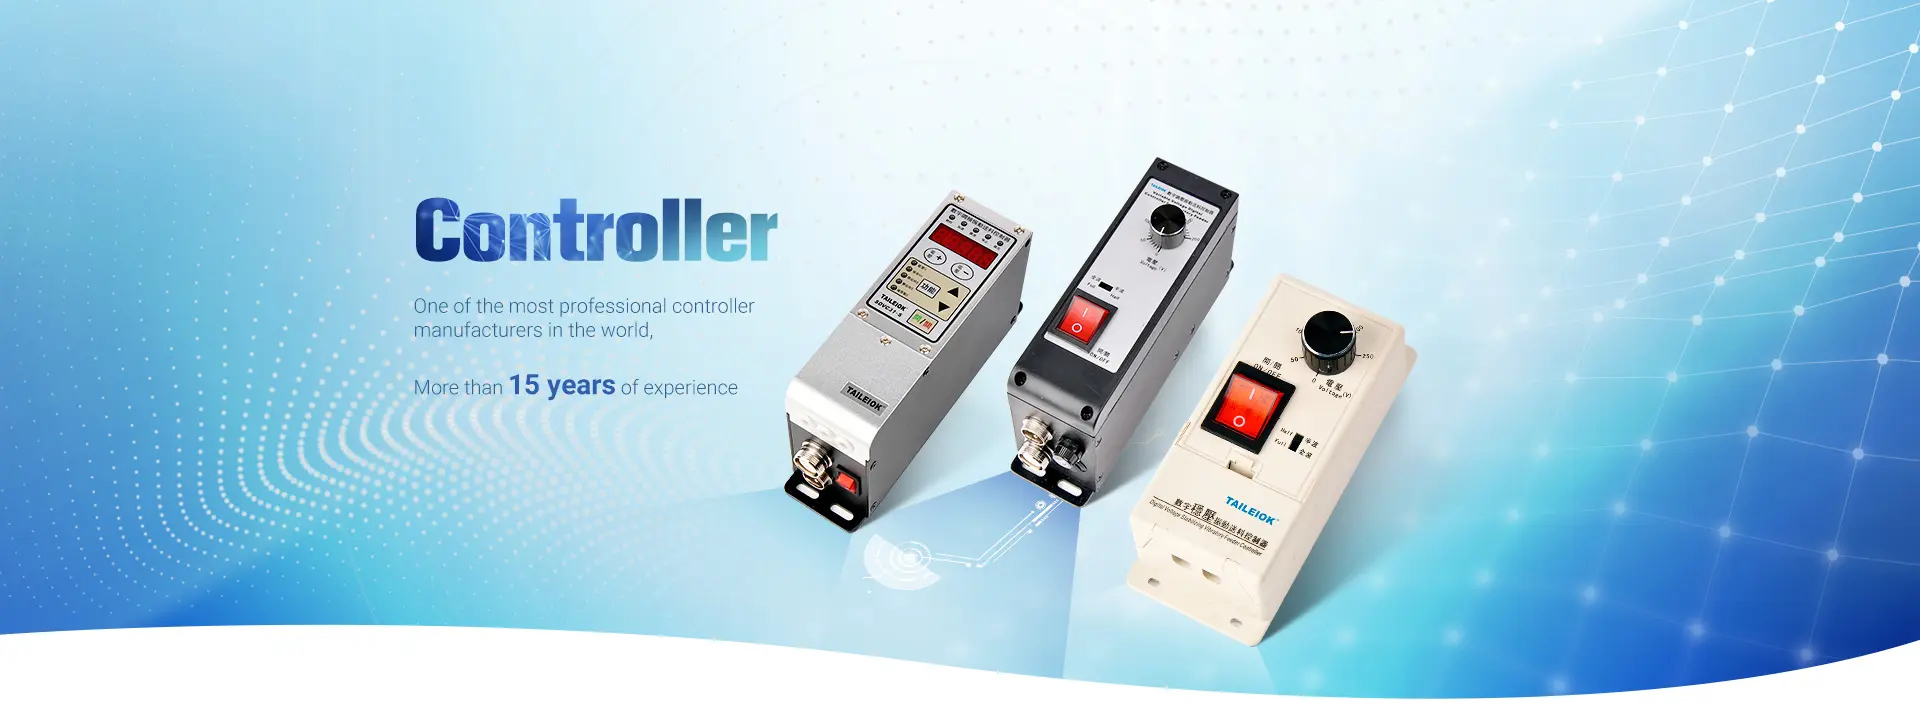 pricelist for logicare voltage stabilizer svc analog meter three phase automatic voltage stabilizer tailei electric product